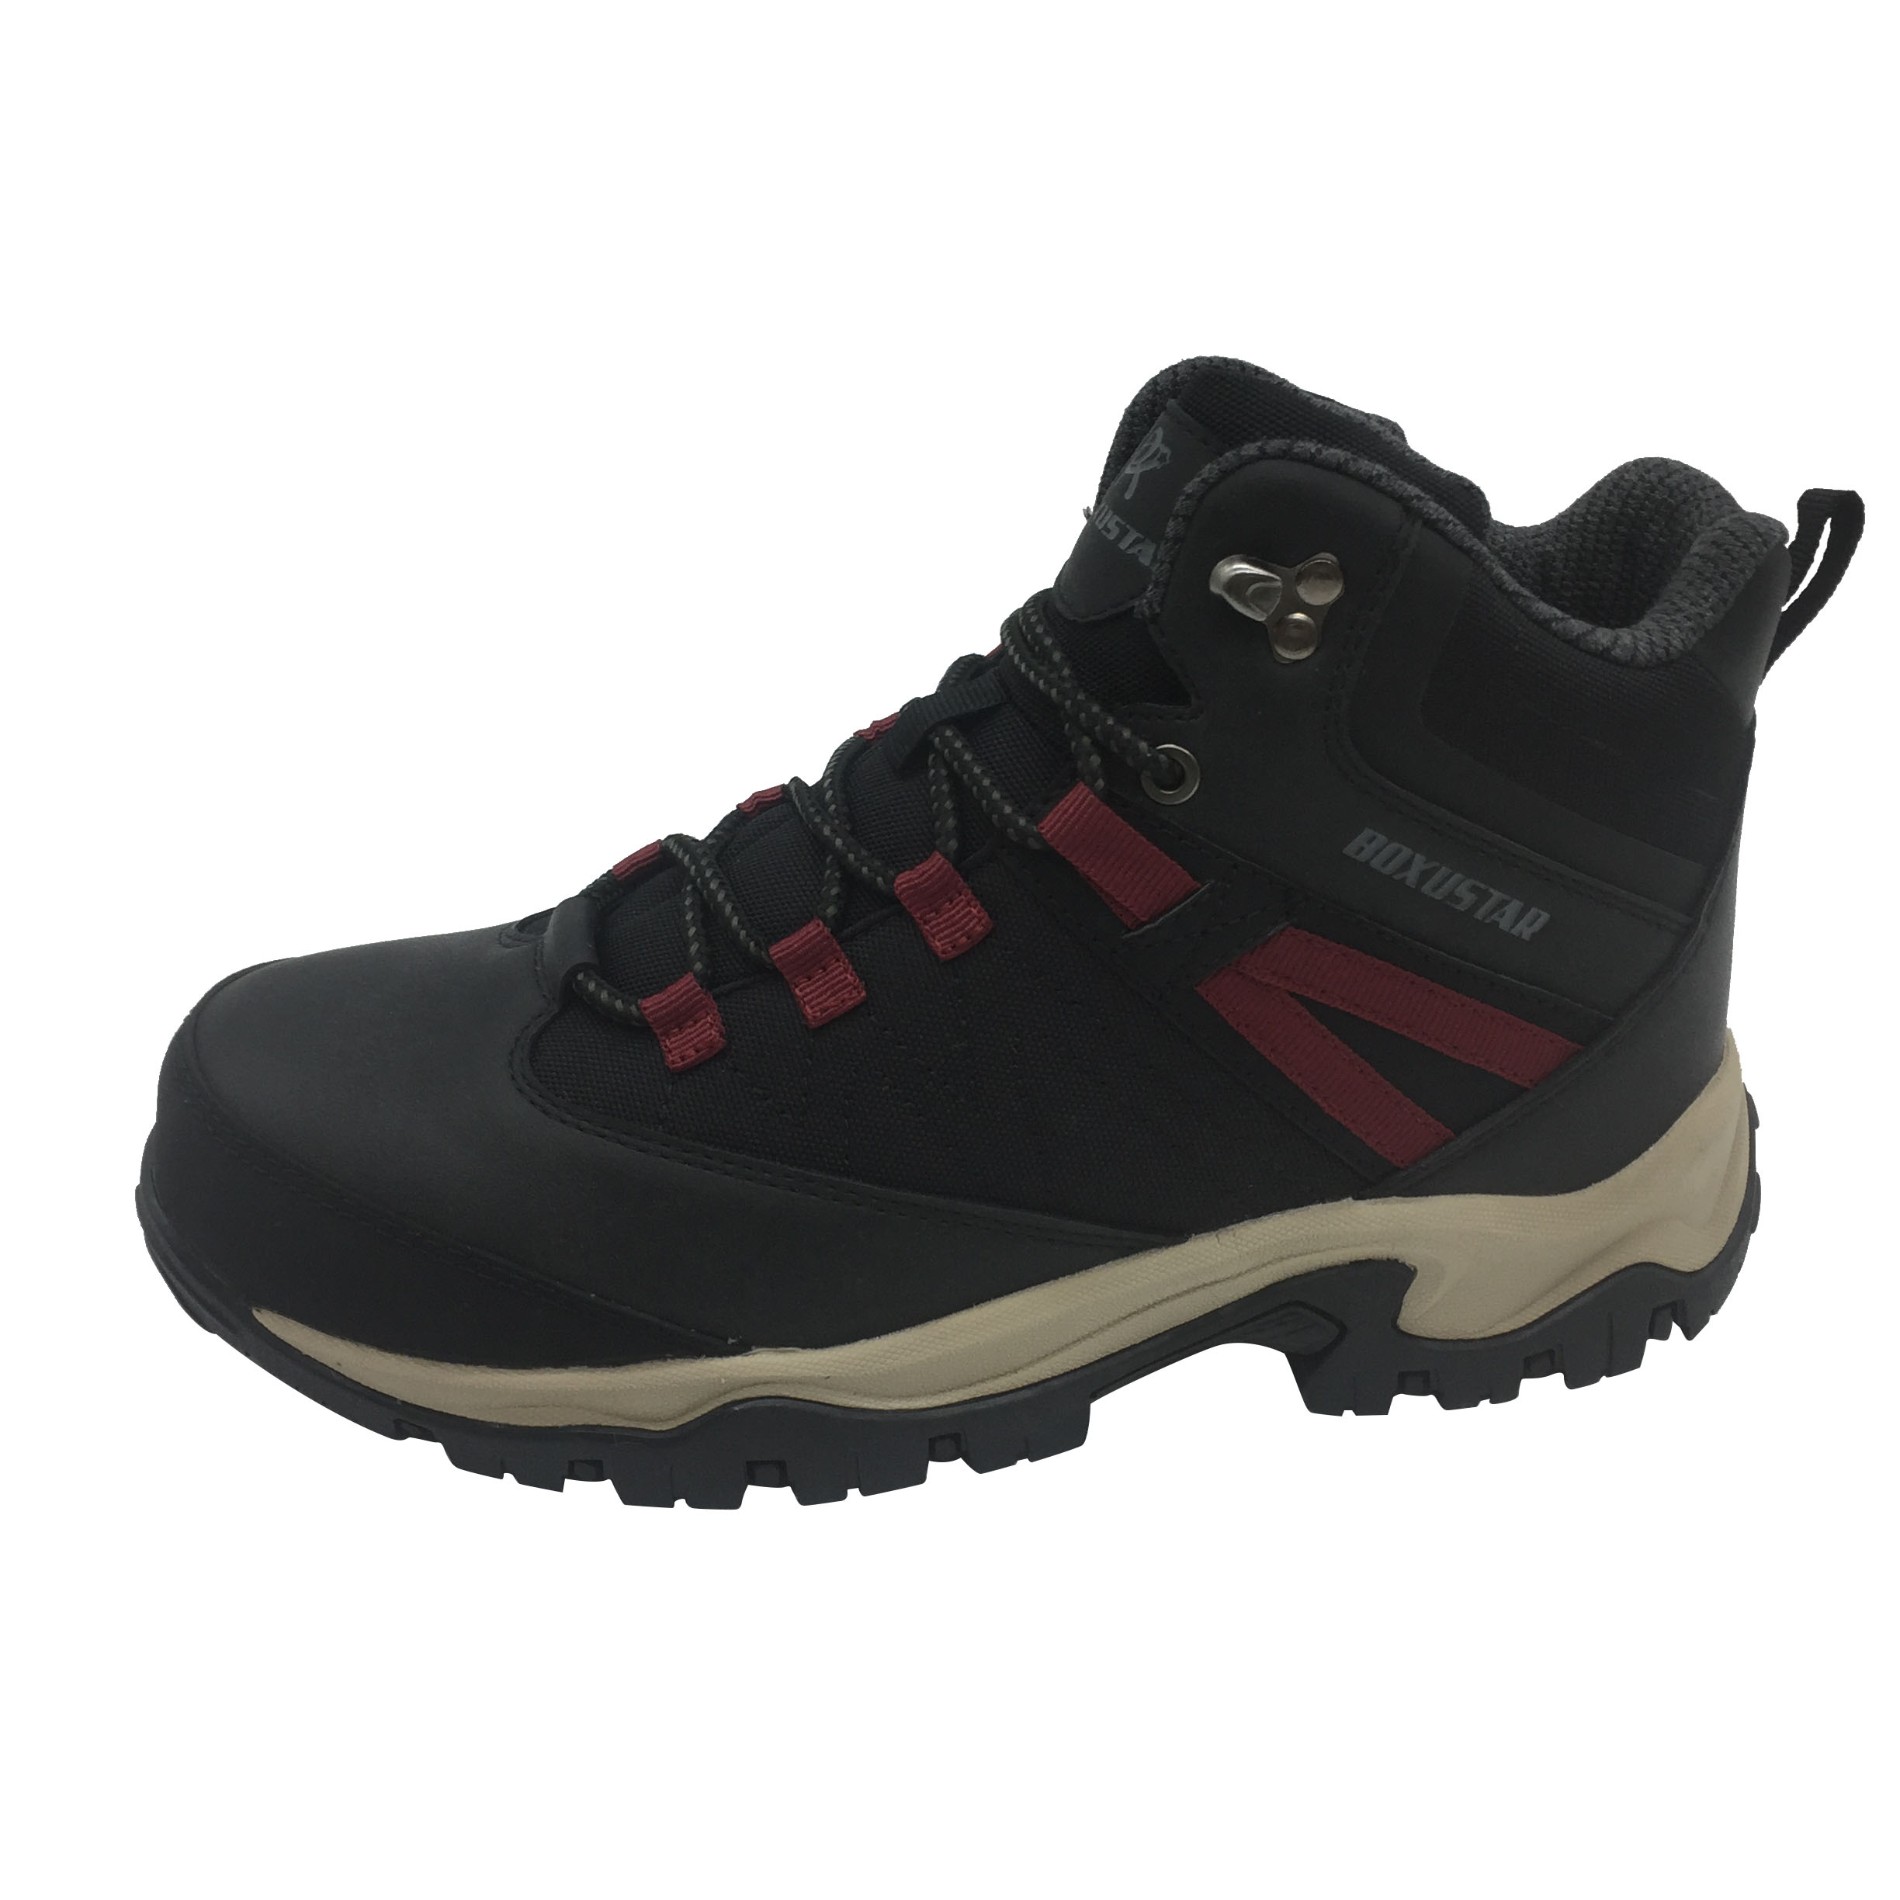 New collection Anti - smashing anti - puncture wear - resistant safety shoes steel toe shoes